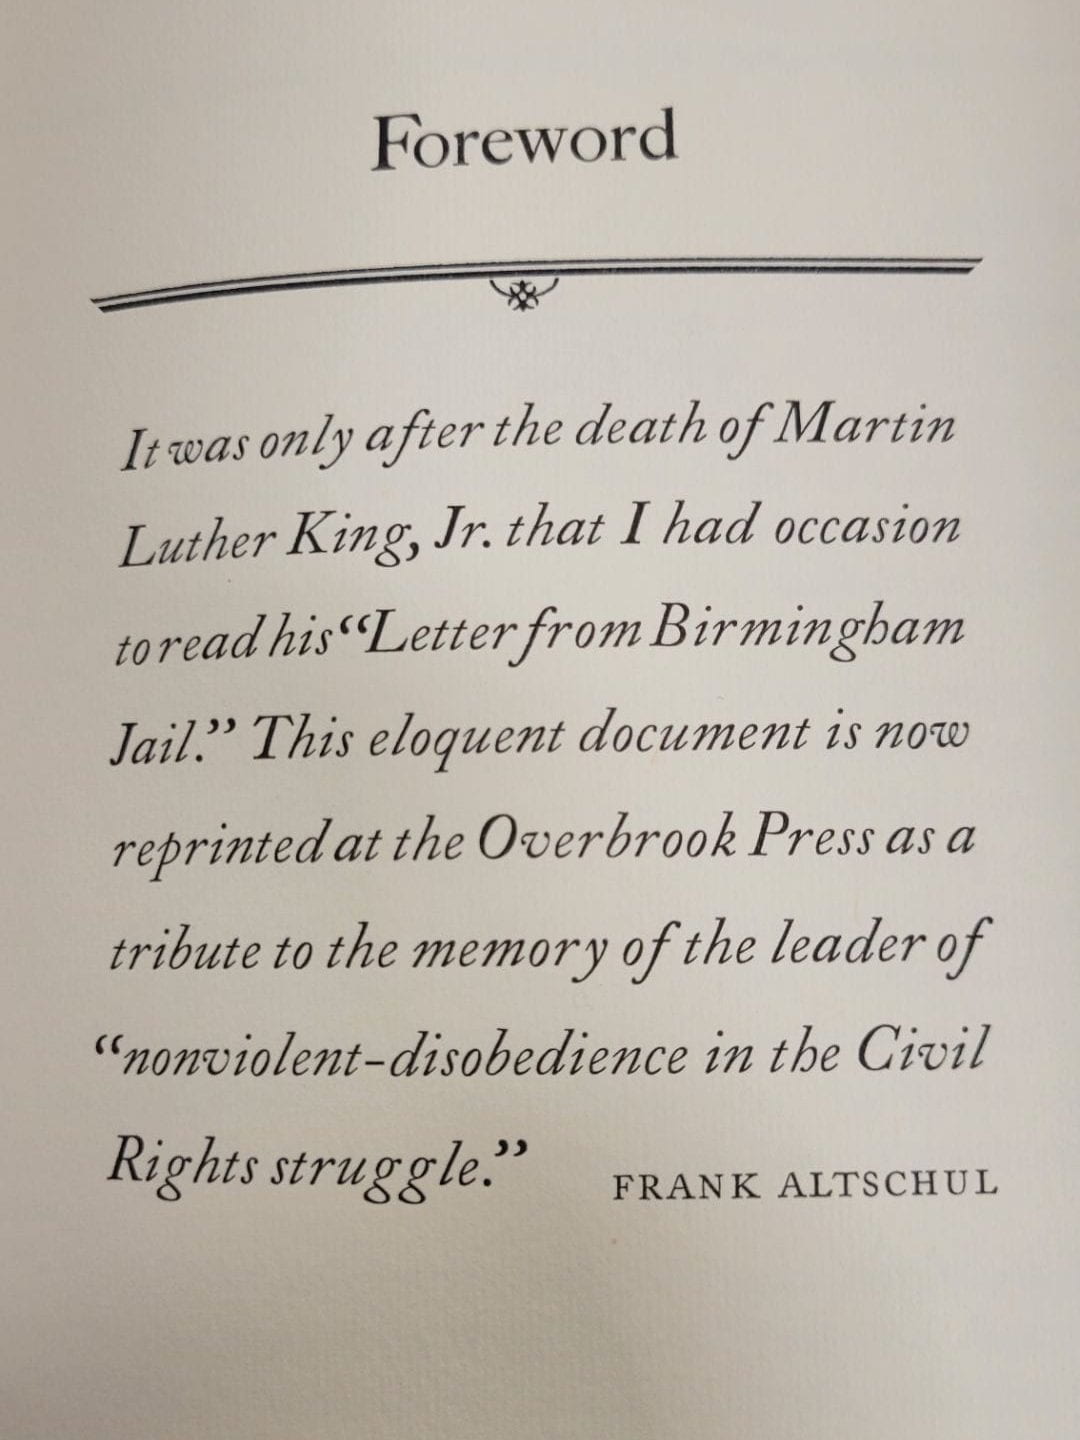 "It was only after the death of Martin Luther King, Jr. that I had occasion to read his "Letter from Birmingham Jail". This eloquent document is now reprinted at the Overbrook Press as a tribute to the memory of the leader of "nonviolent-disobedience in the Civil Rights struggle."
--Frank Altschul